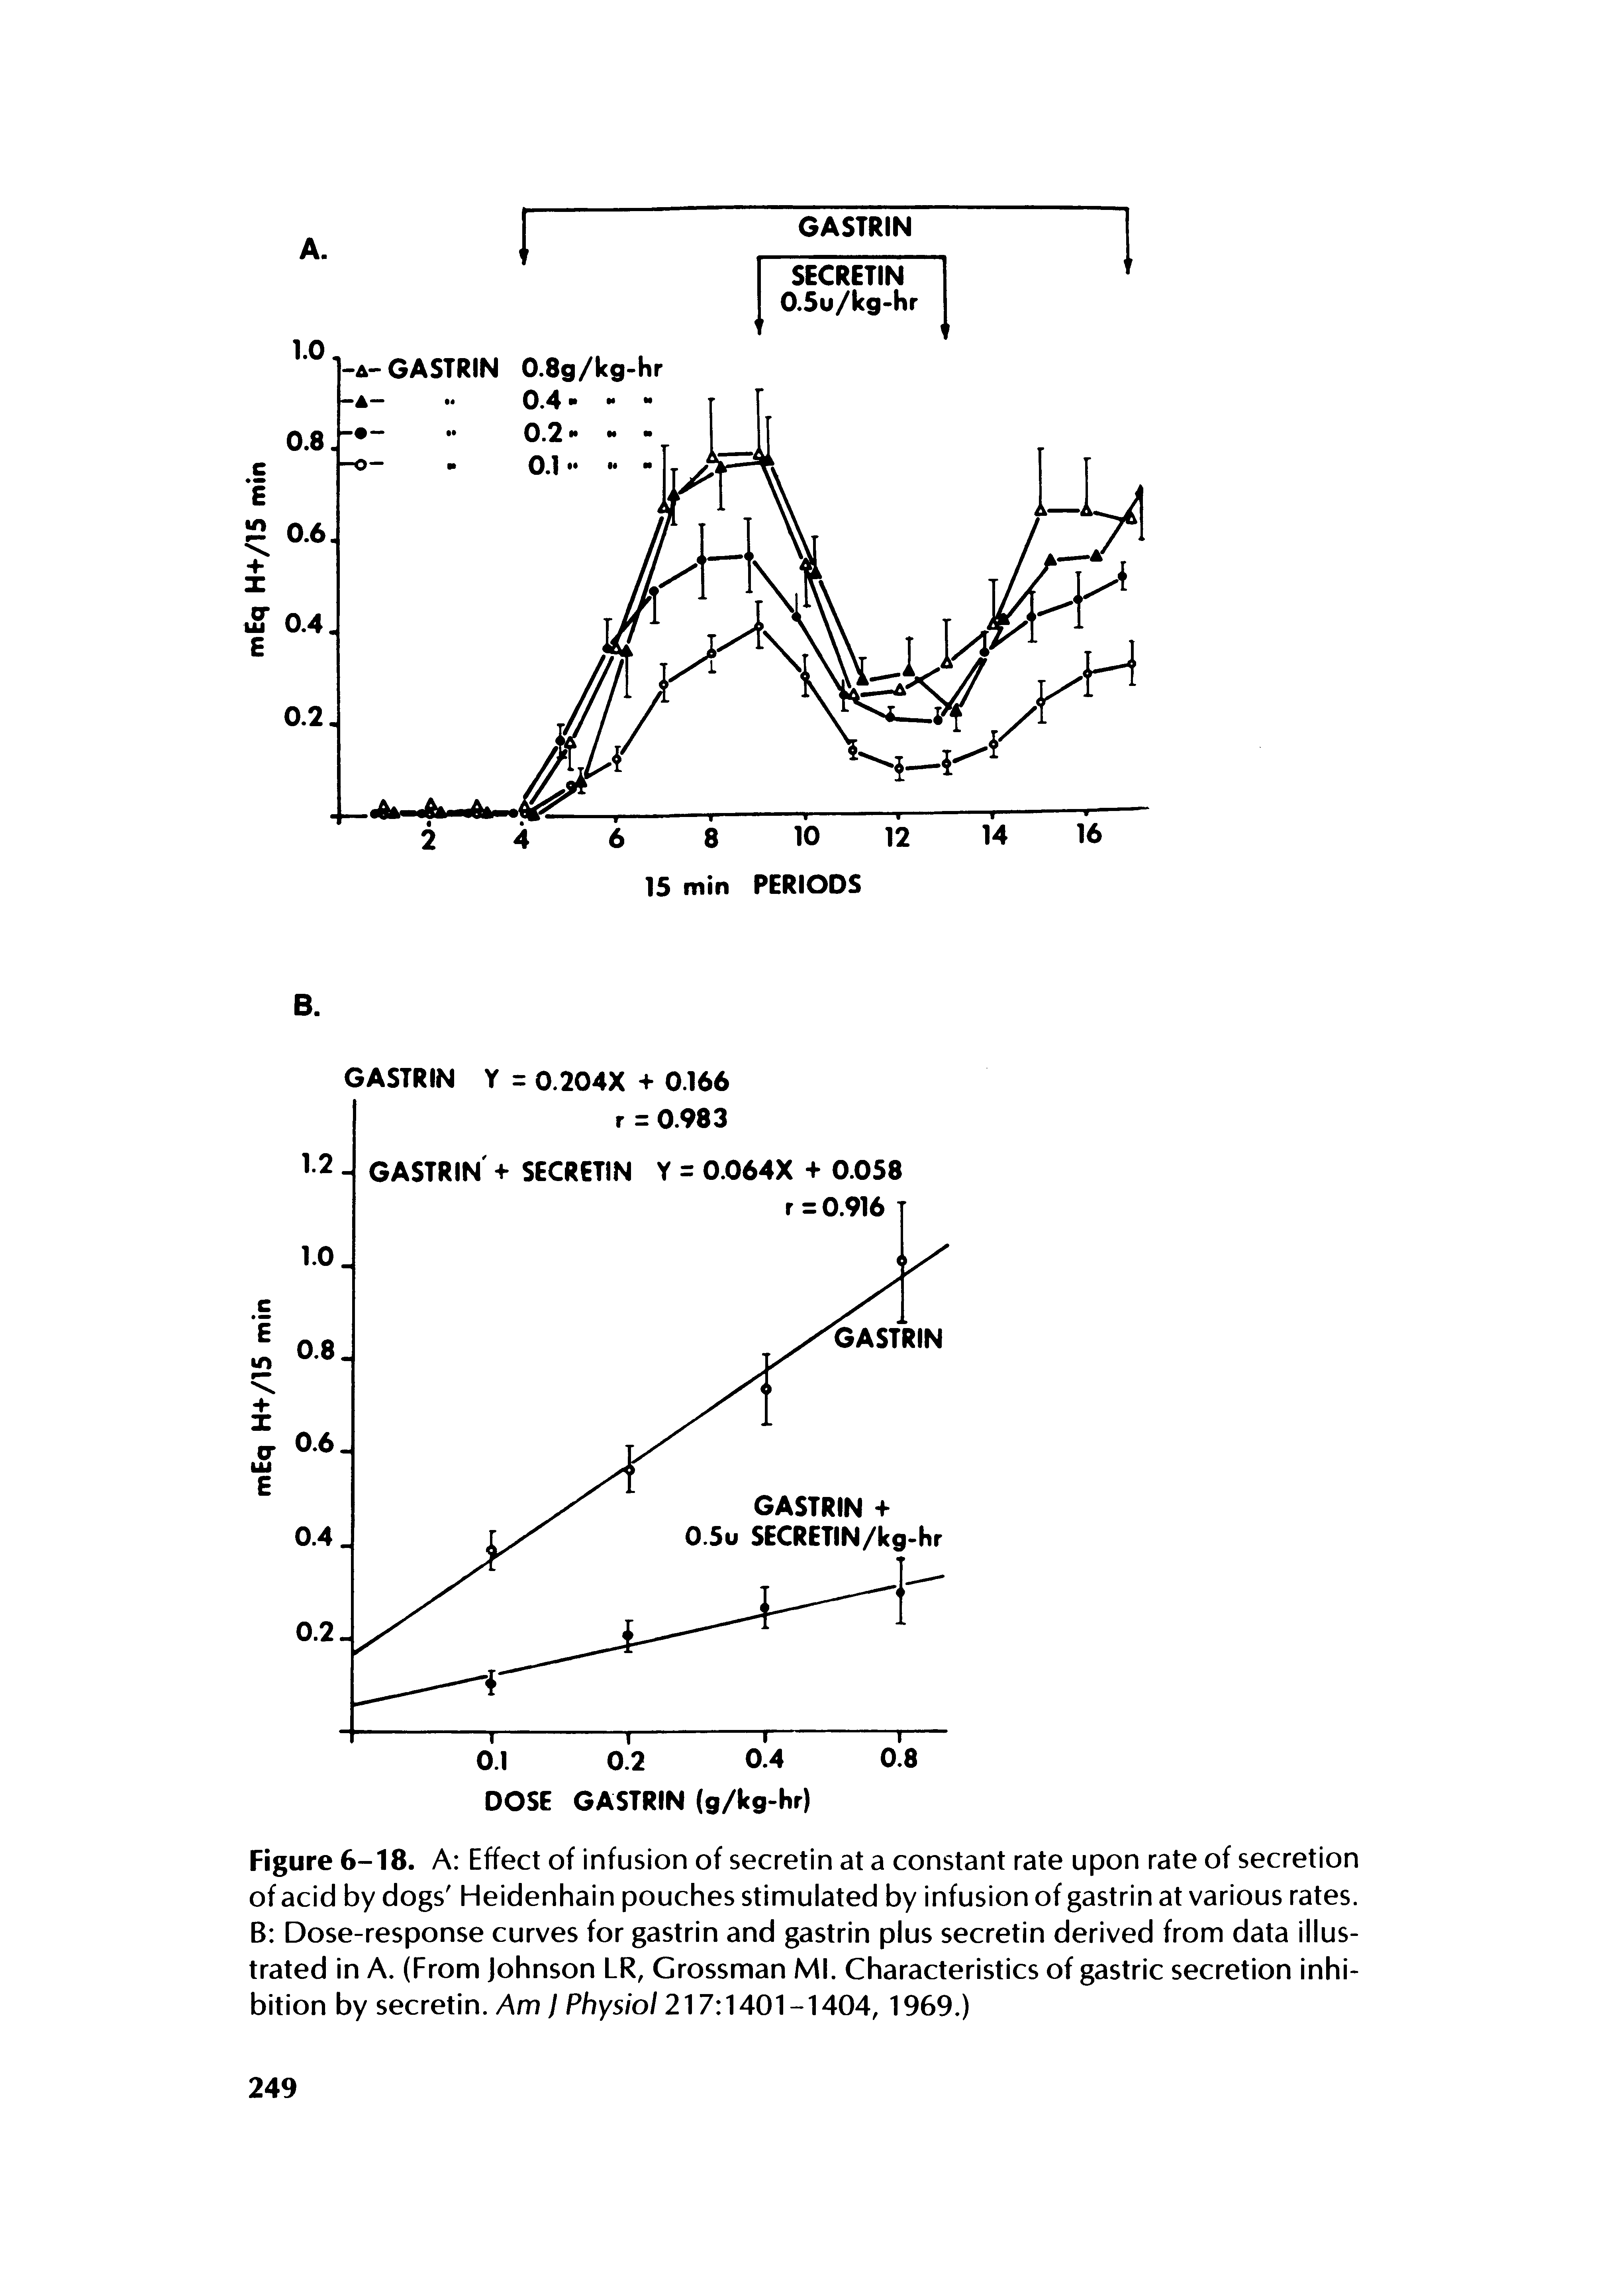 Figure 6-18. A Effect of infusion of secretin at a constant rate upon rate of secretion of acid by dogs Heidenhain pouches stimulated by infusion of gastrin at various rates. B Dose-response curves for gastrin and gastrin plus secretin derived from data illustrated in A. (From Johnson LR, Grossman Ml. Characteristics of gastric secretion inhibition by secretin. Am I Physiol 217 1401-1404, 1969.)...